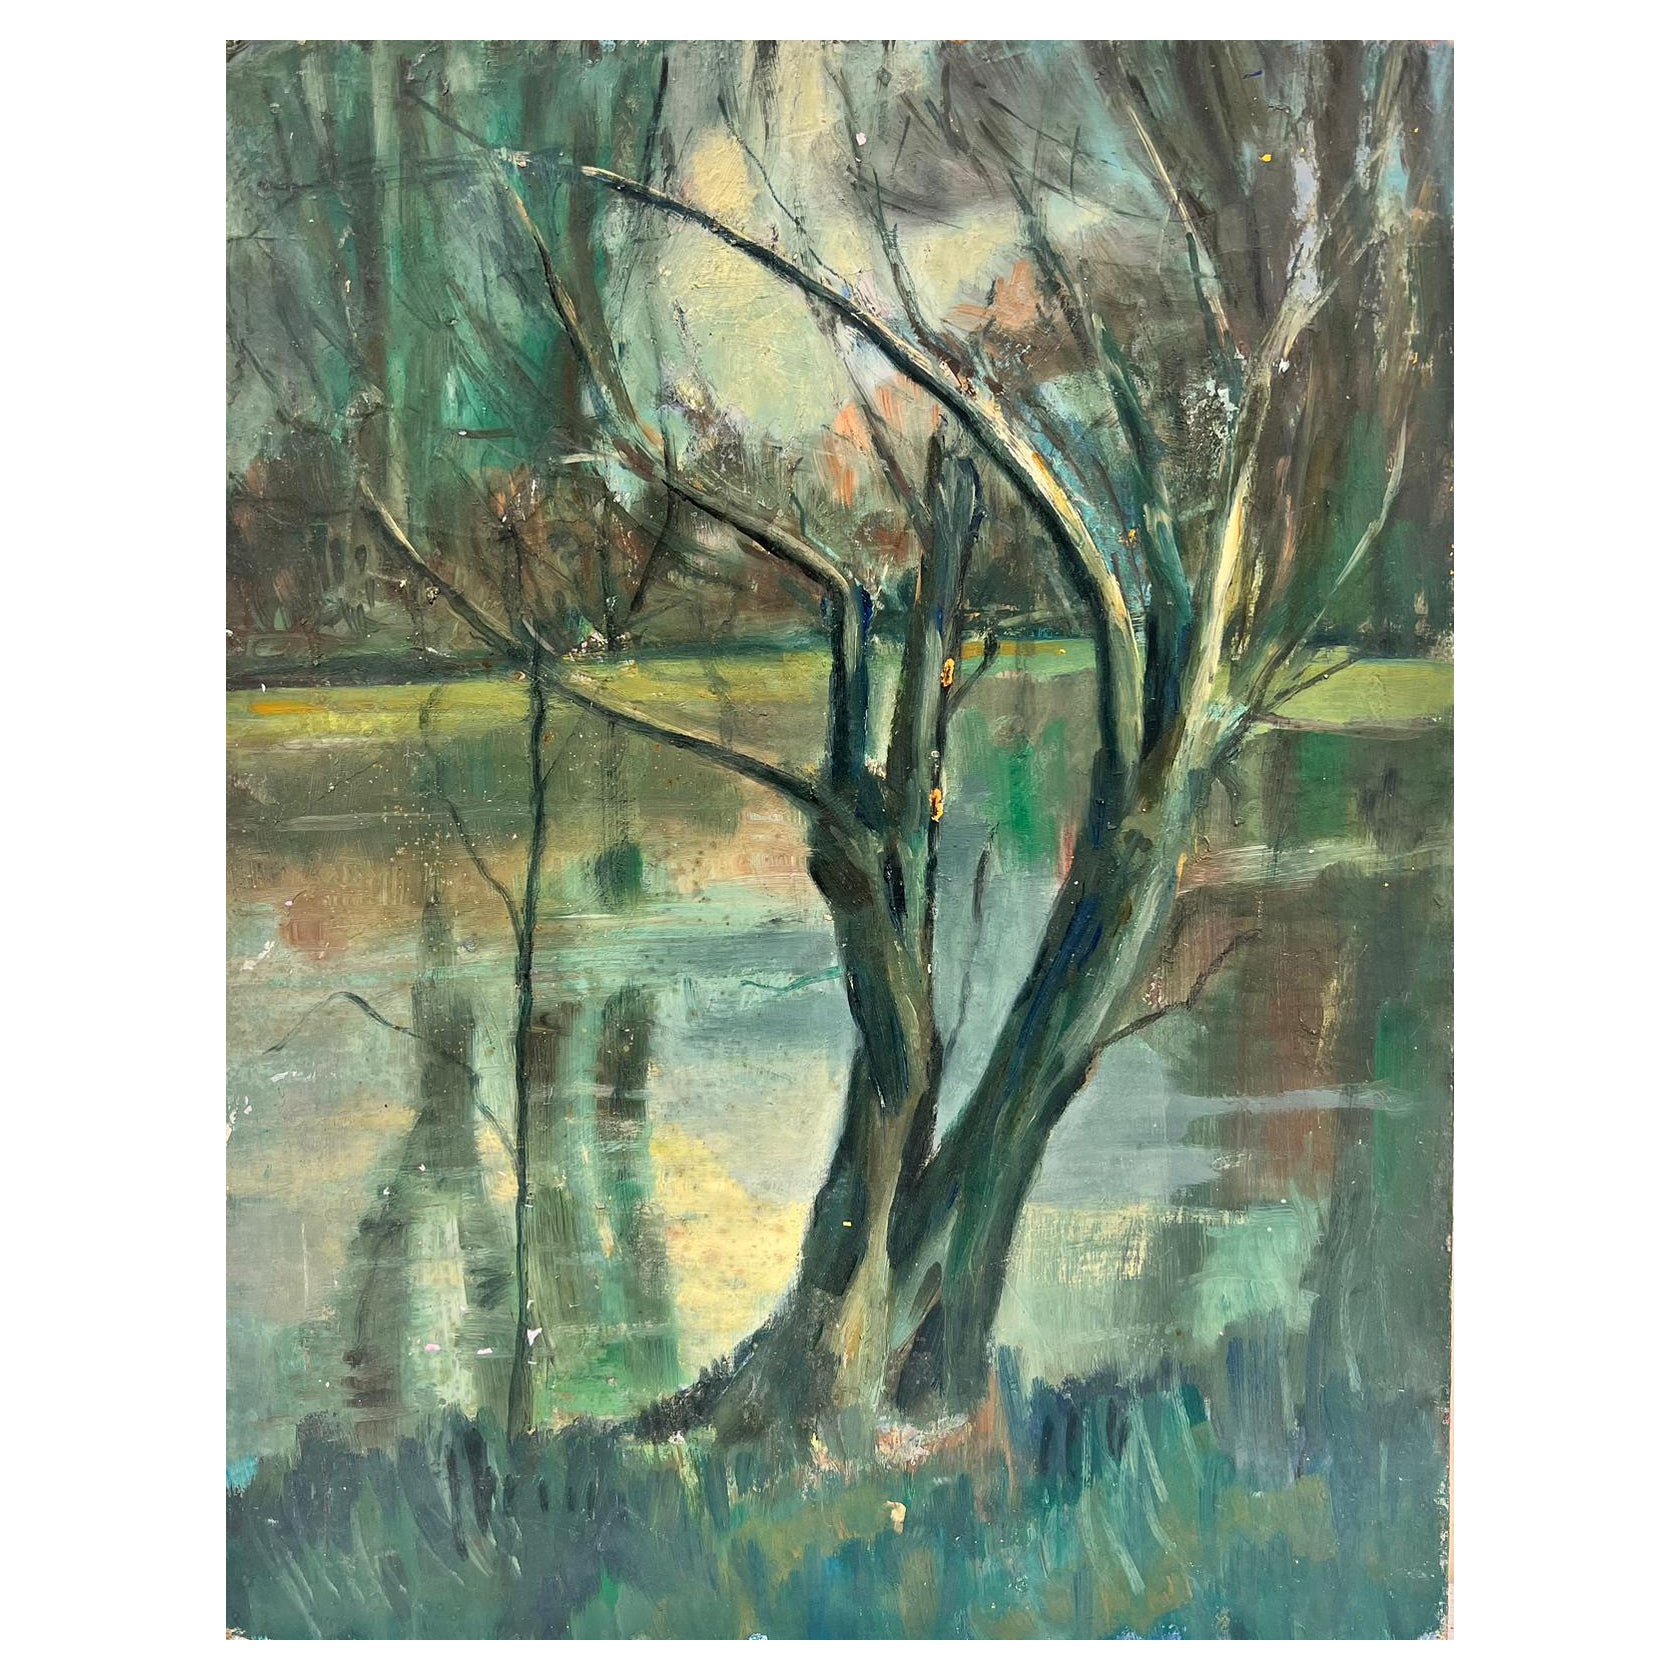 French School Landscape Painting - 1950's French Modernist Oil Painting Bare Trees by Lake Moody Atmospheric Colors